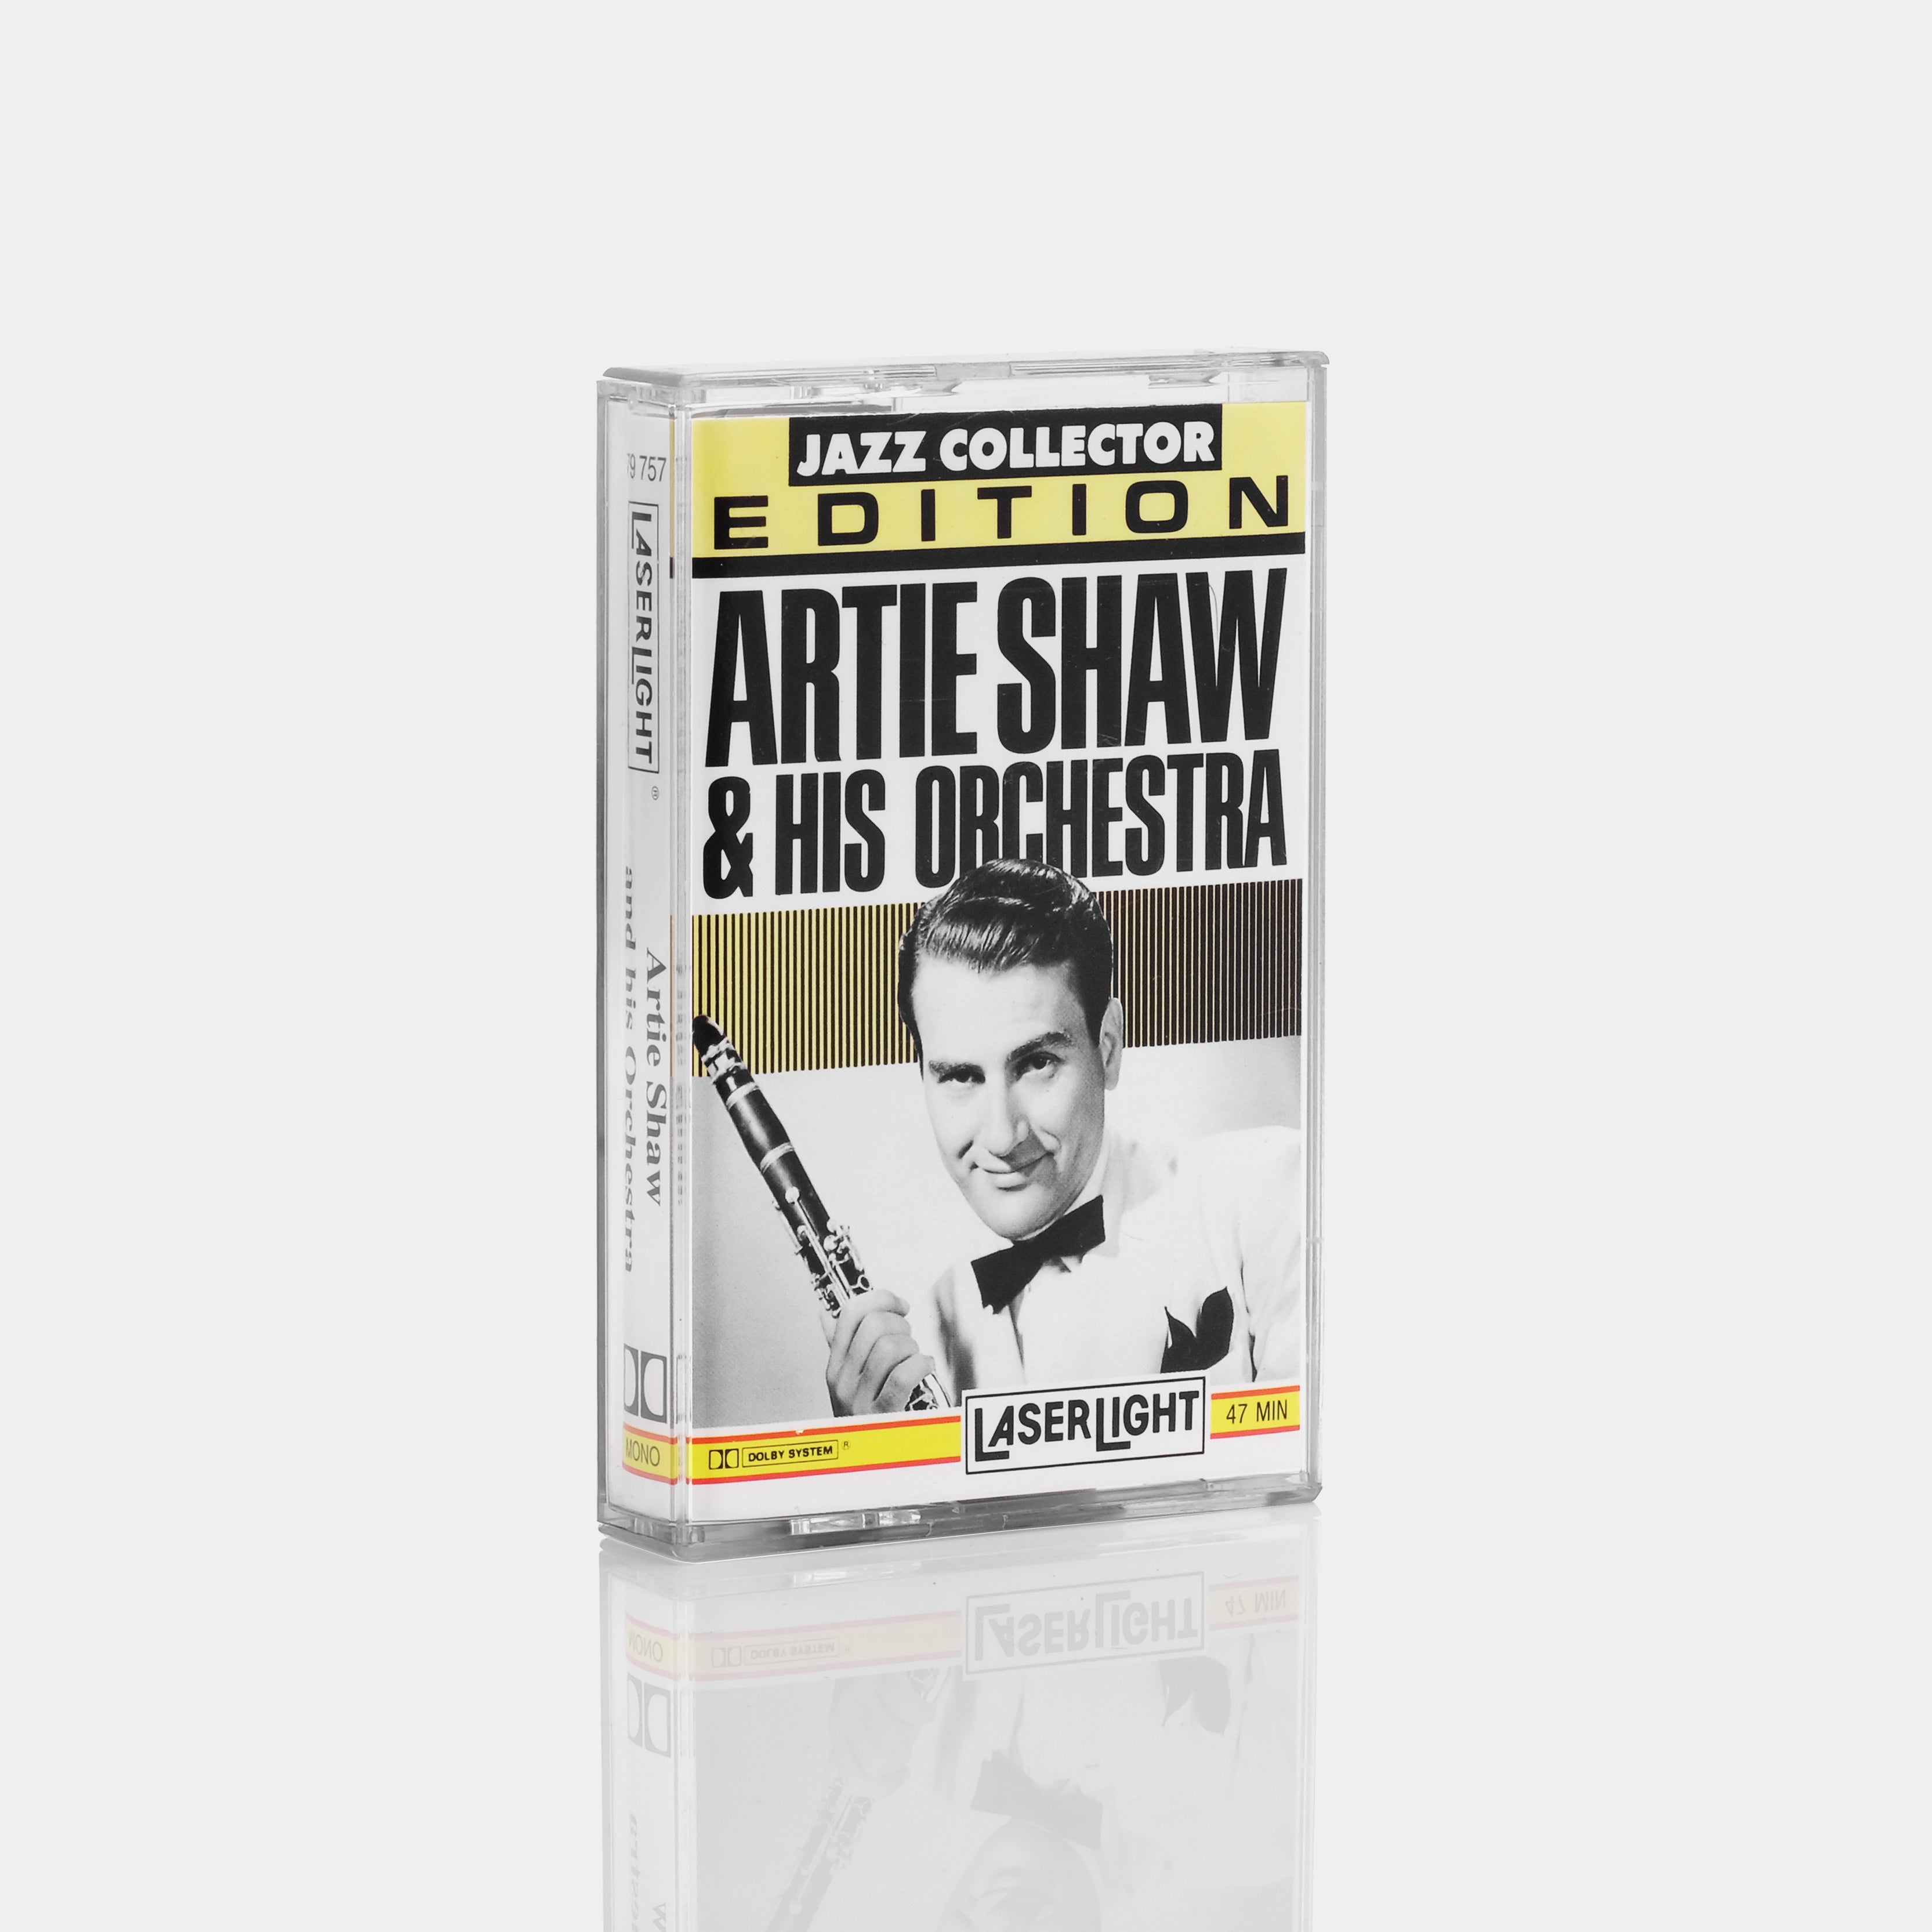 Artie Shaw & His Orchestra (Jazz Collector Edition) Cassette Tape